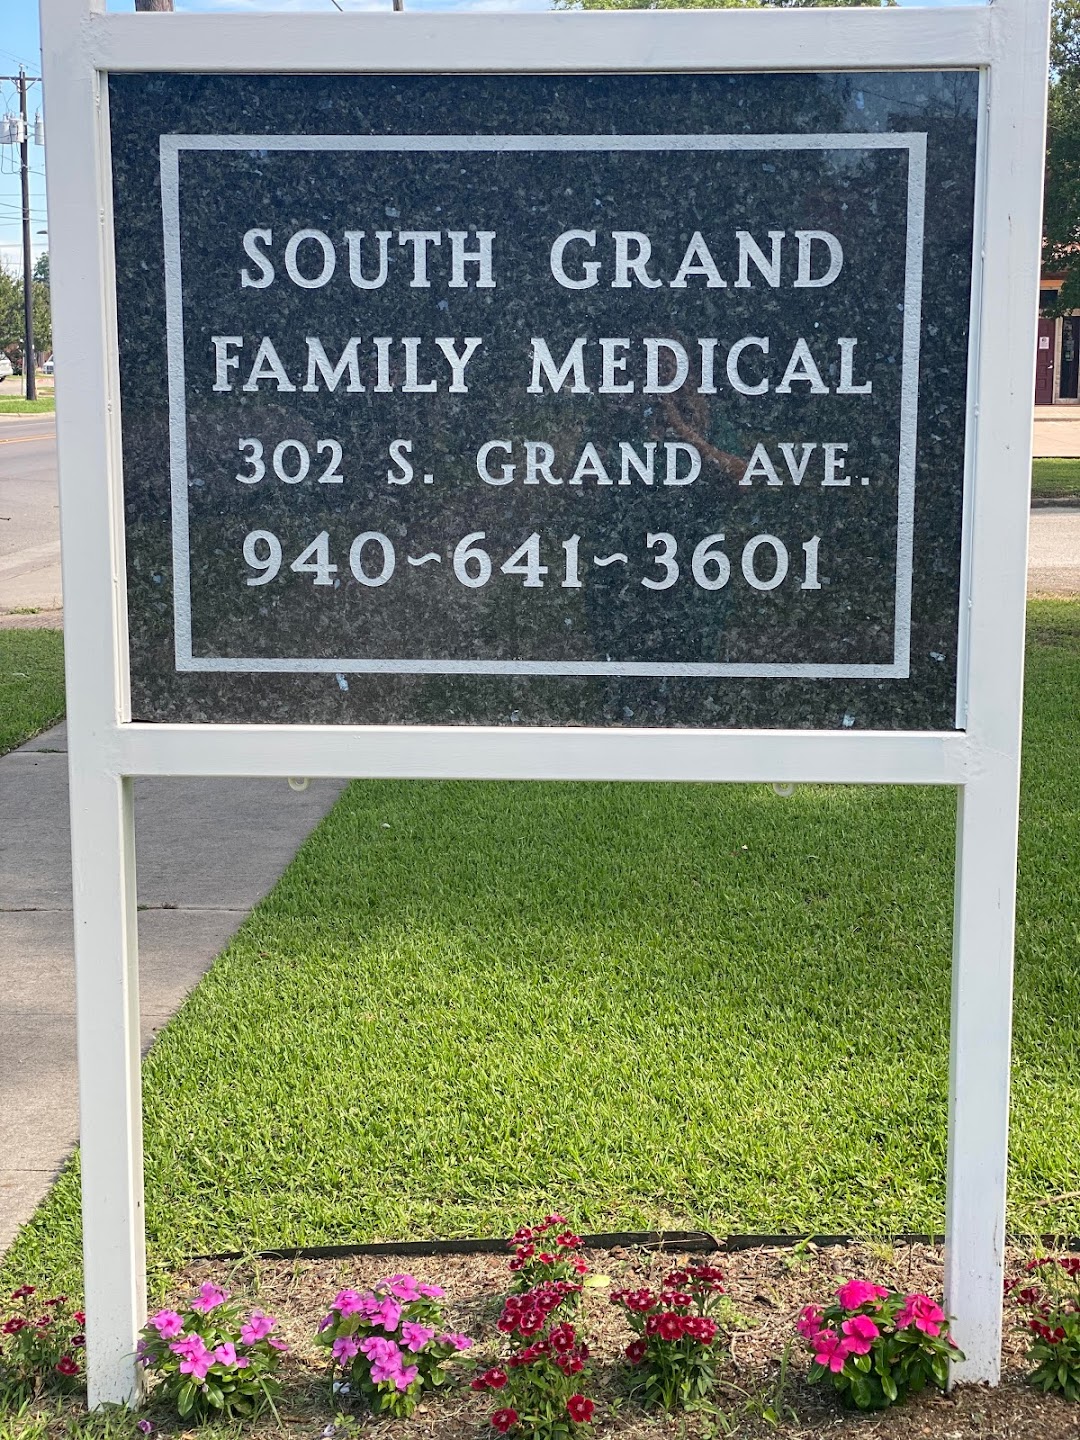 South Grand Family Medical